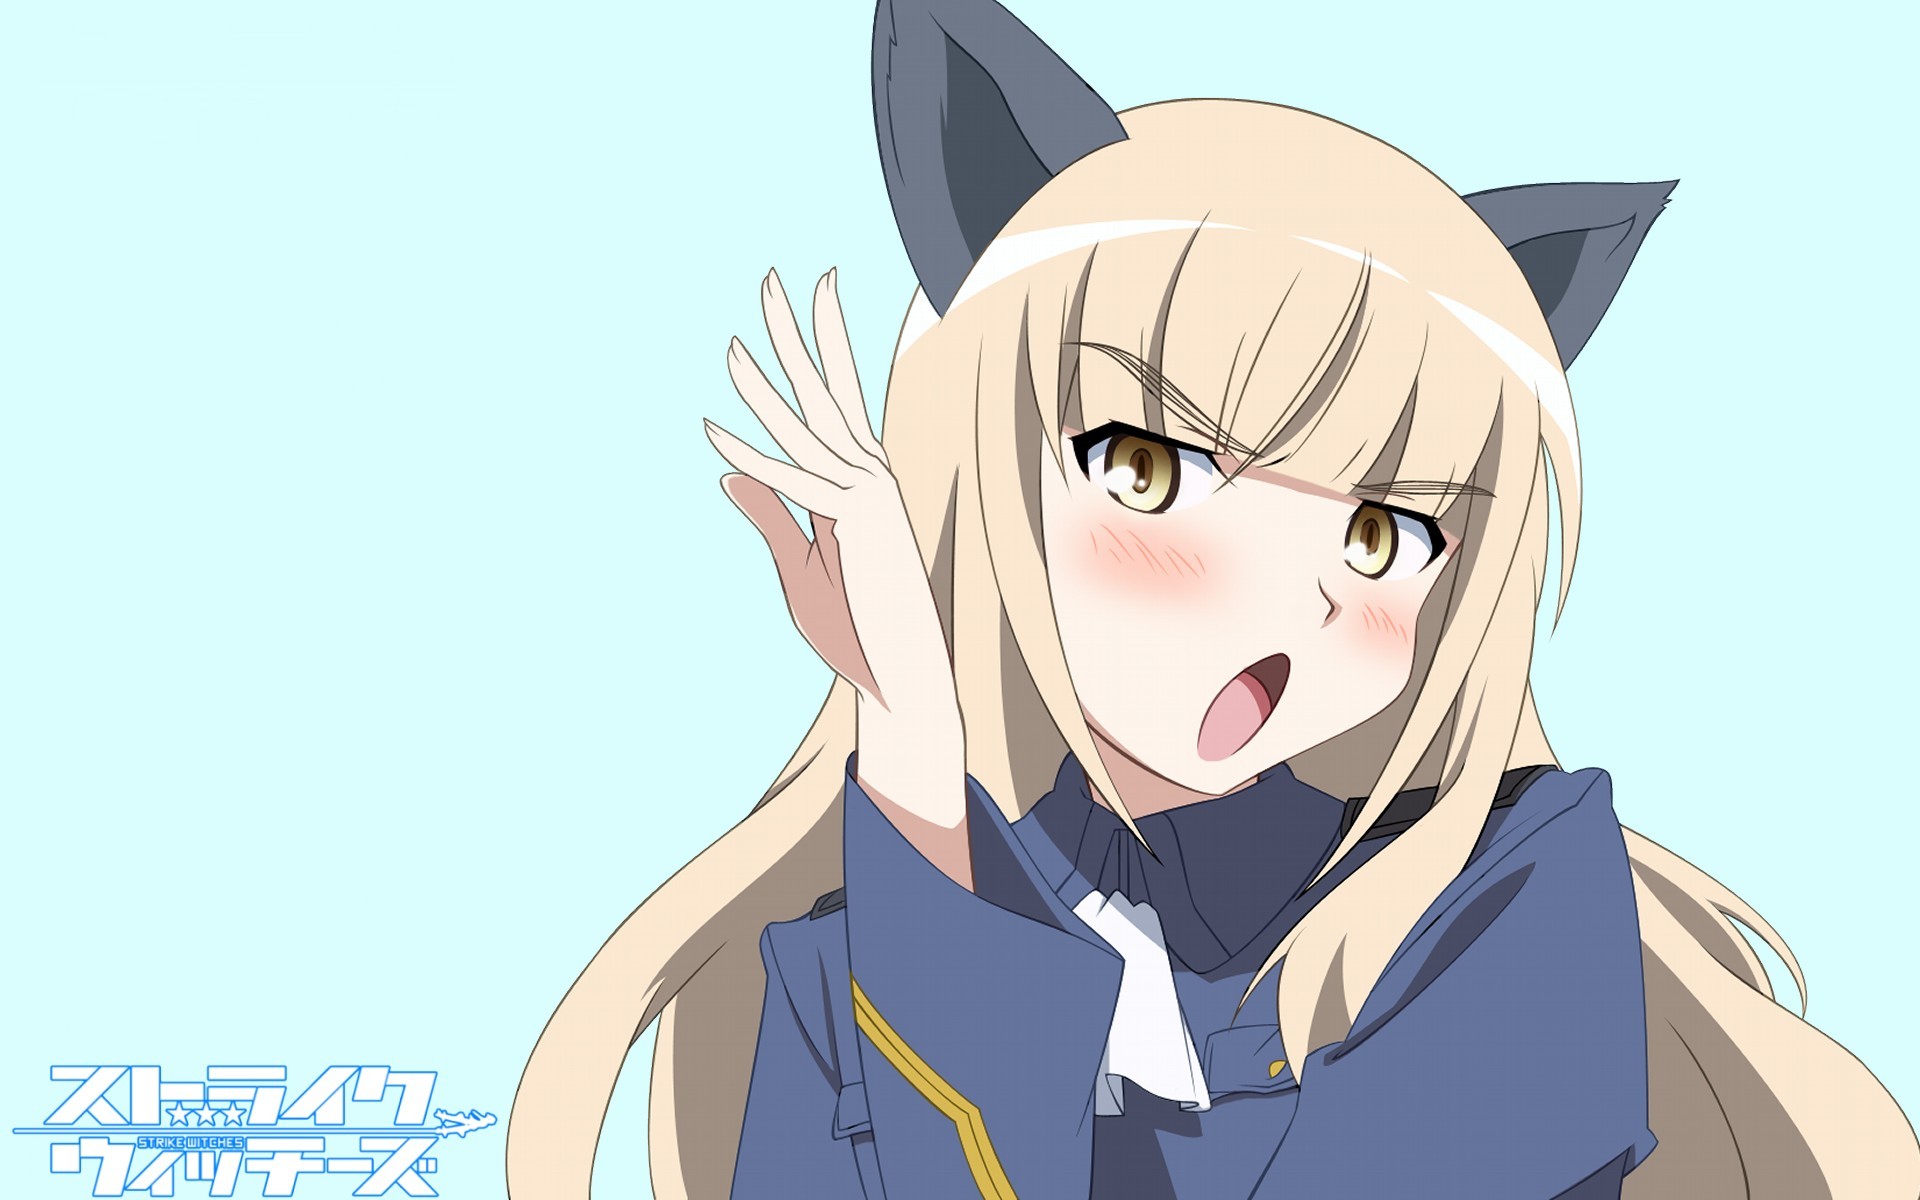 blondes, Strike Witches, uniforms, army, military, text, long hair, nekomimi, animal ears, yellow eyes, blush, open mouth, Perrine H. Clostermann, simple background, anime girls, blue background - desktop wallpaper